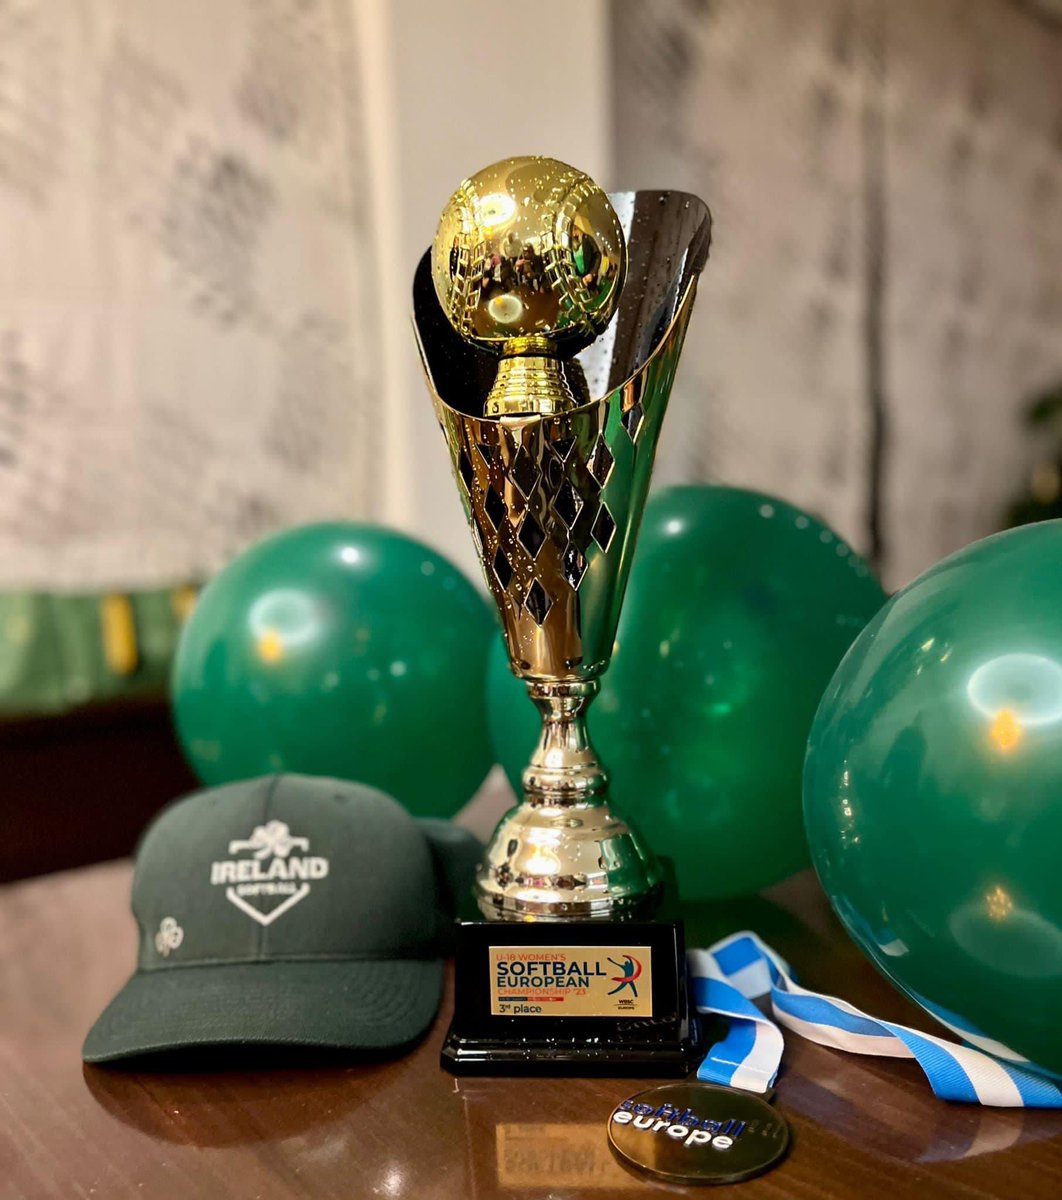 @AerLingus We may need an extra piece of cabin luggage on EI643 for the👇we have collected at the Womens U18 European Softball Championships. You will be also carrying precious cargo in some of our players and coaches who have just qualified for the 2024 World Cup! #webleedgreen